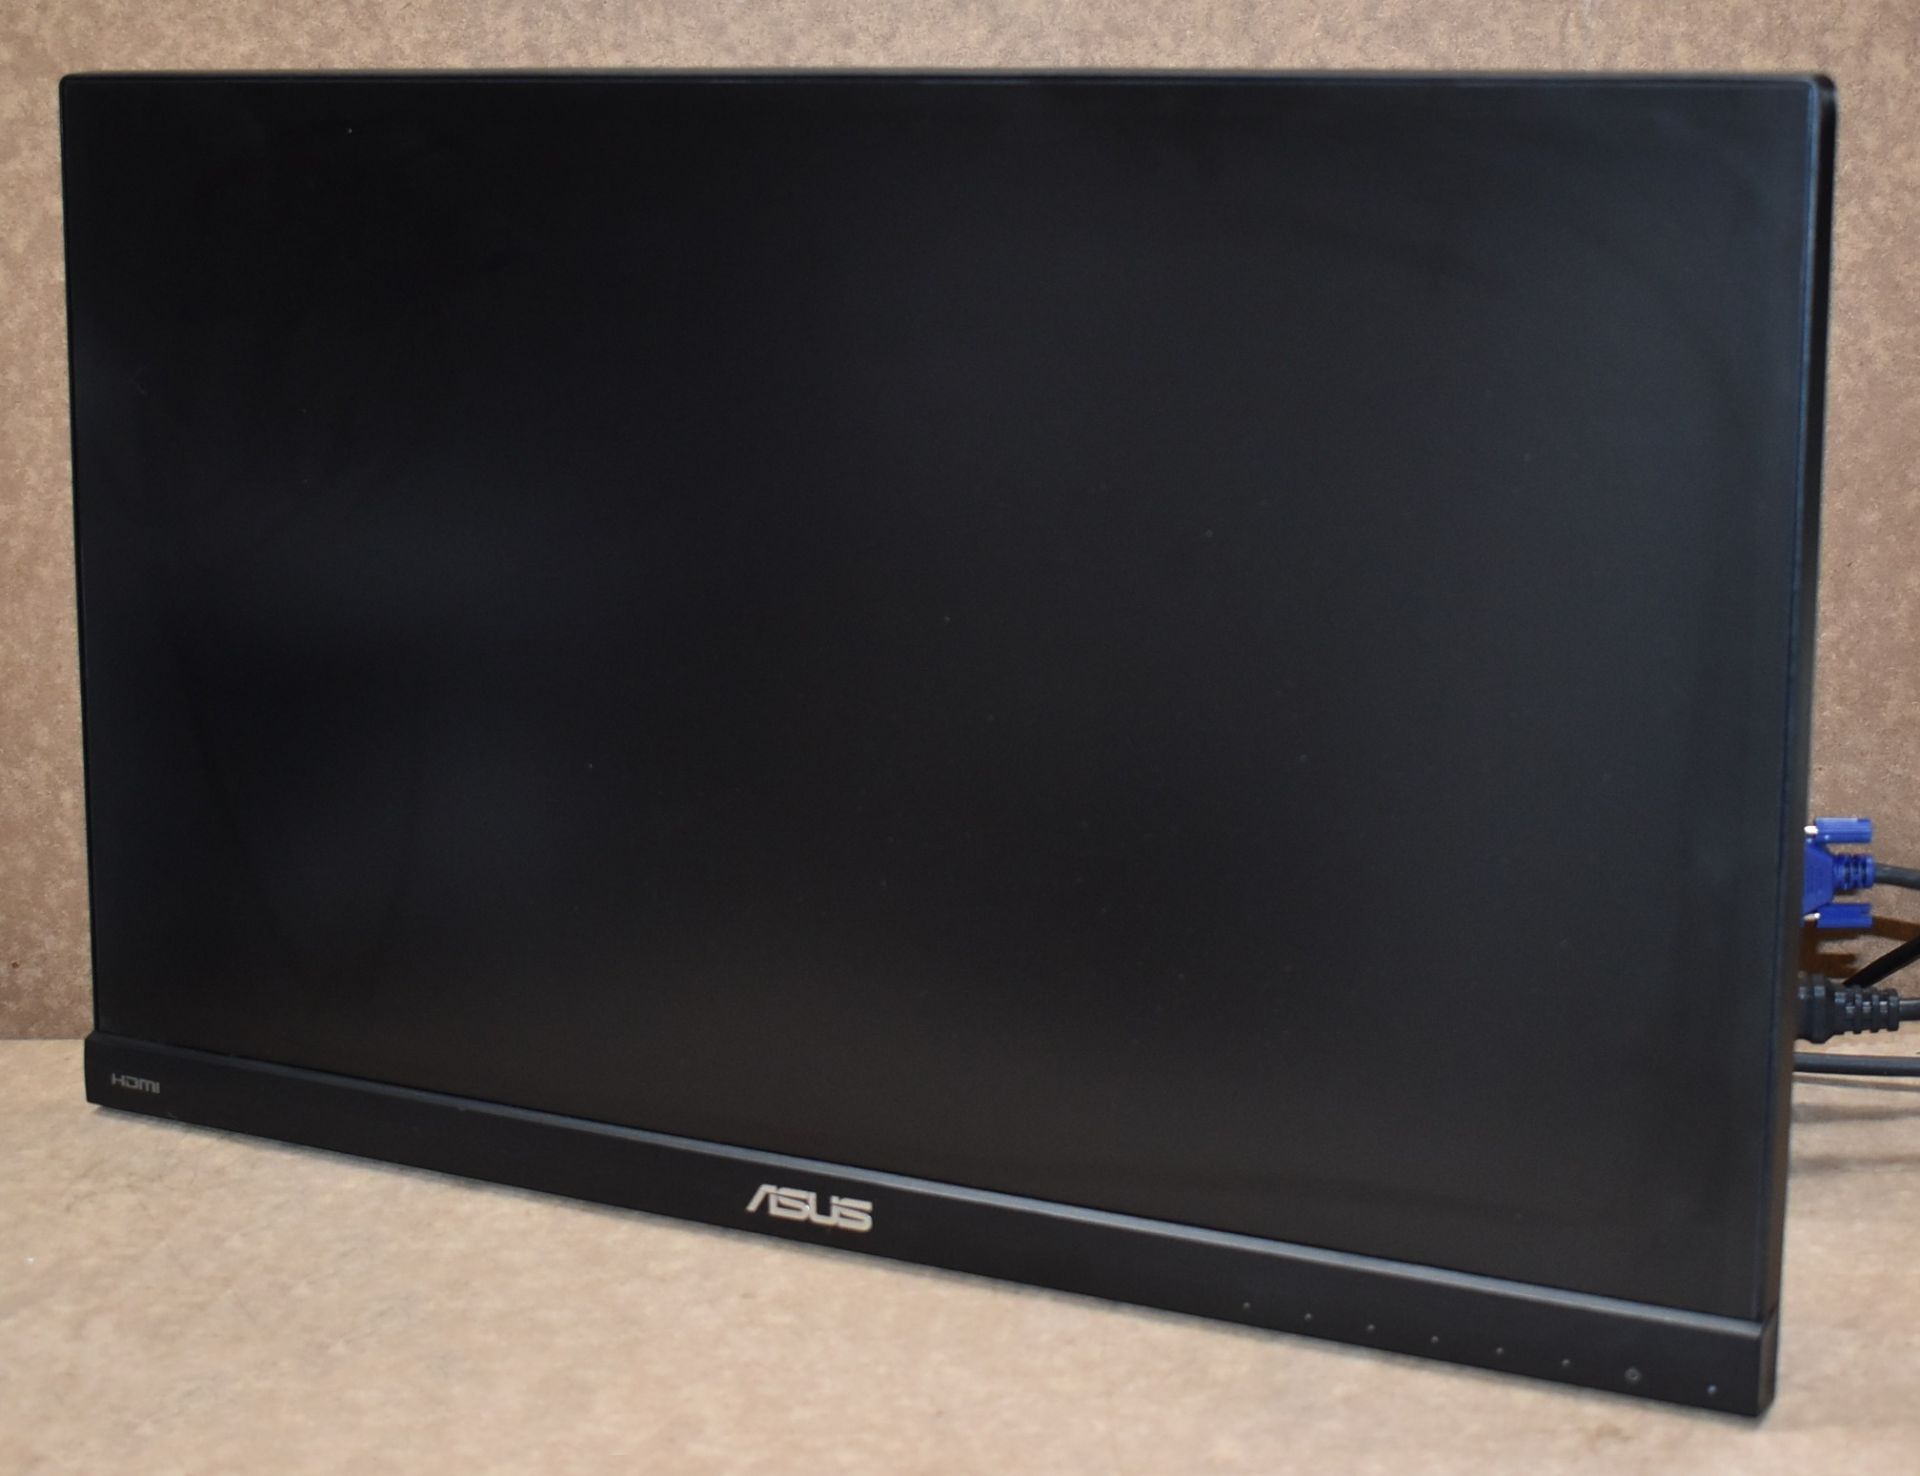 1 x Asus 23 Inch FHD Monitor - 1920 x 1080 Resolution - Model VC239 - Ref: MPC215 CA - CL678 - - Image 7 of 7